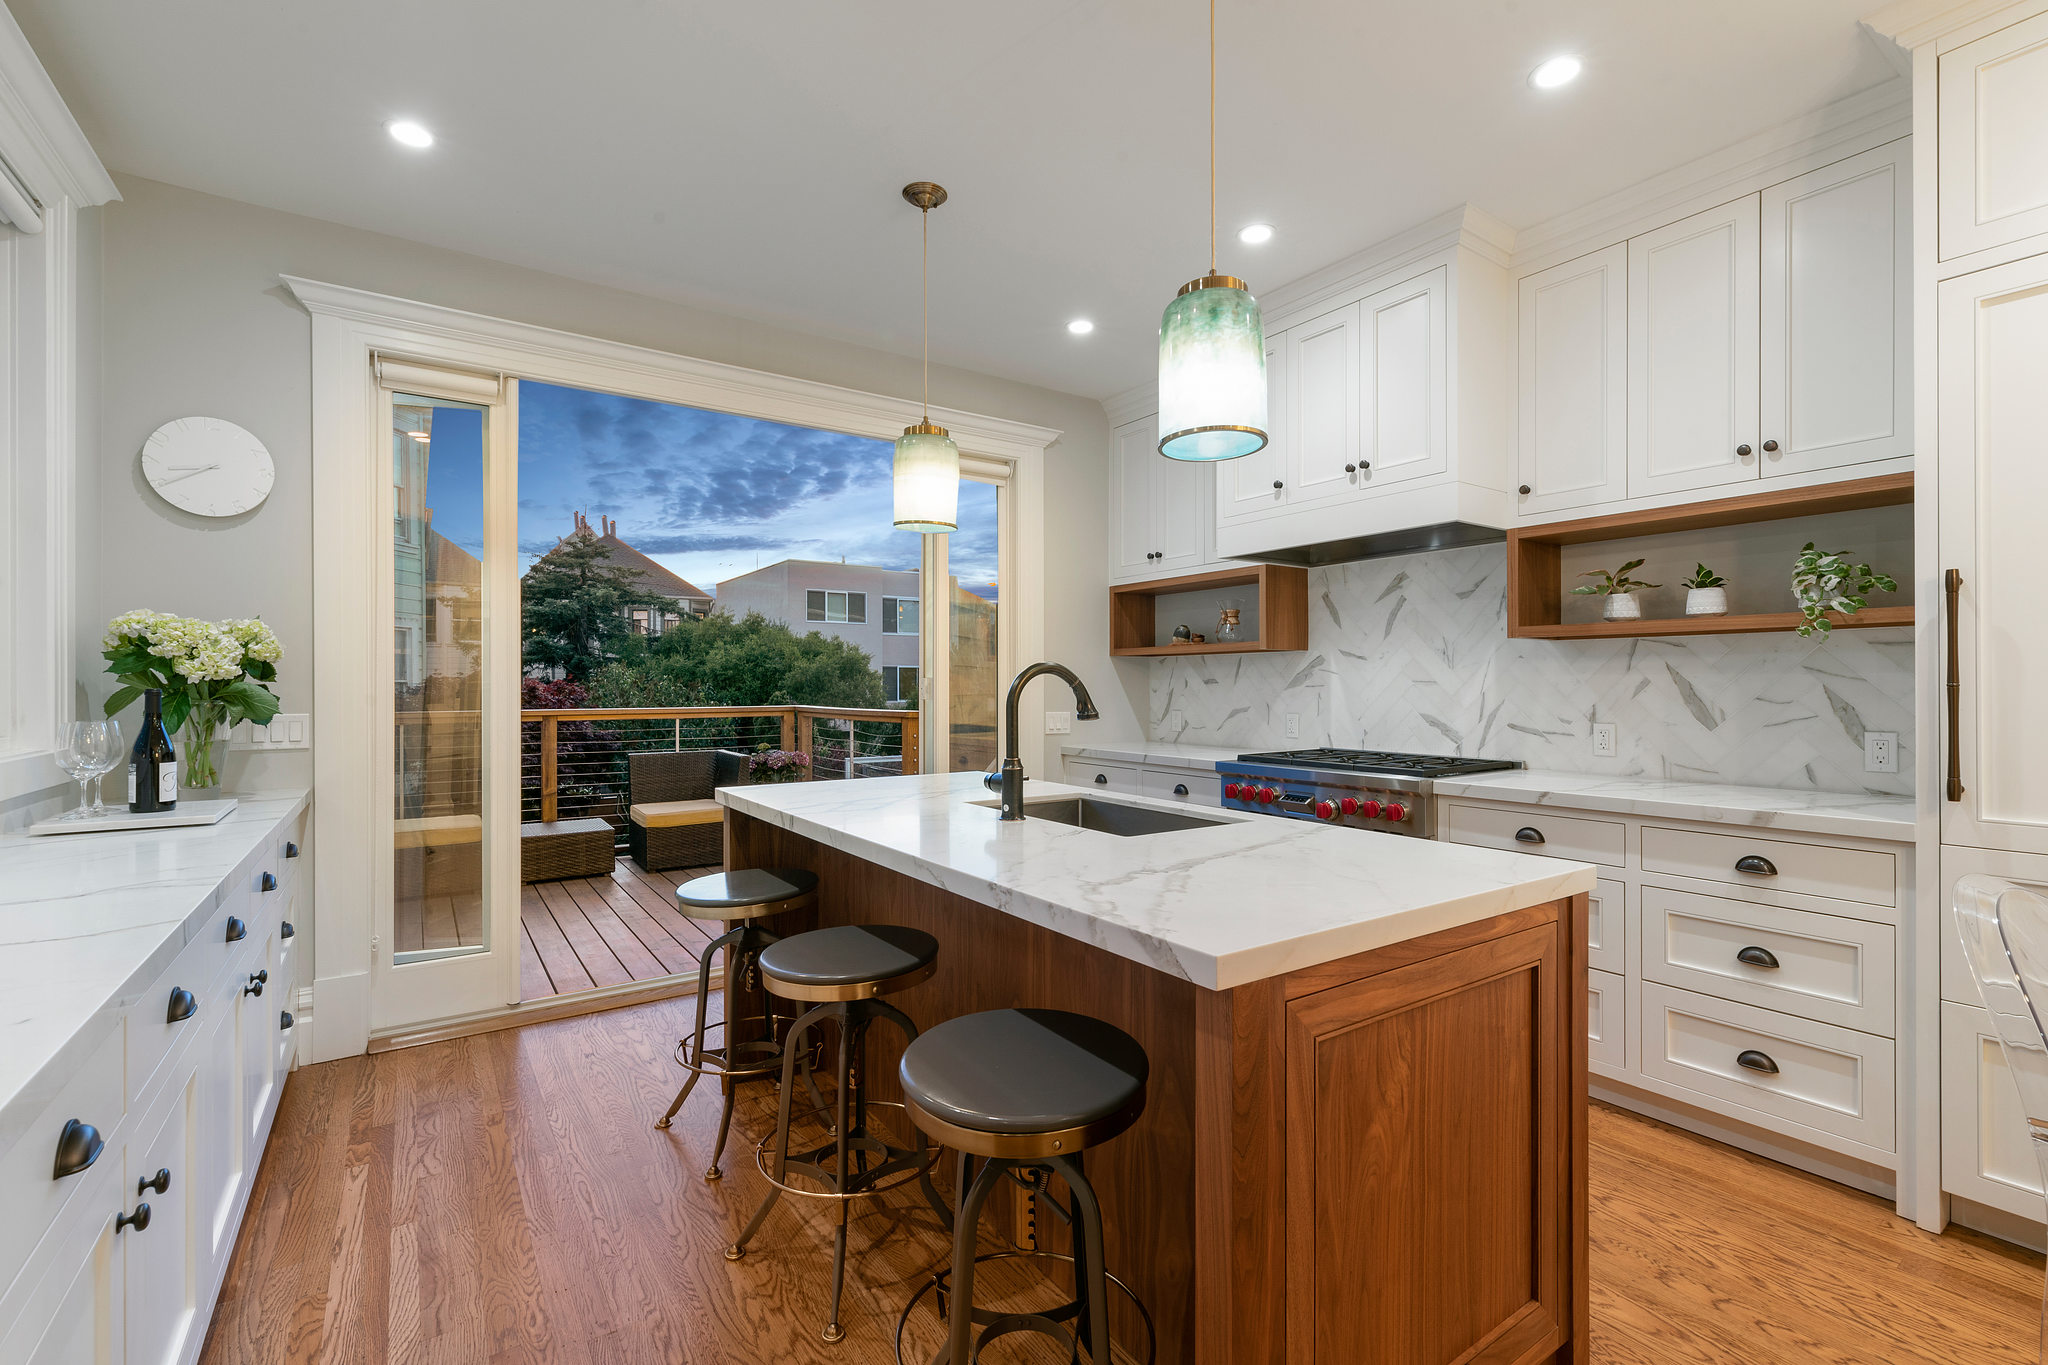 View of a kitchen, featuring white cabinetry, center island, and patio